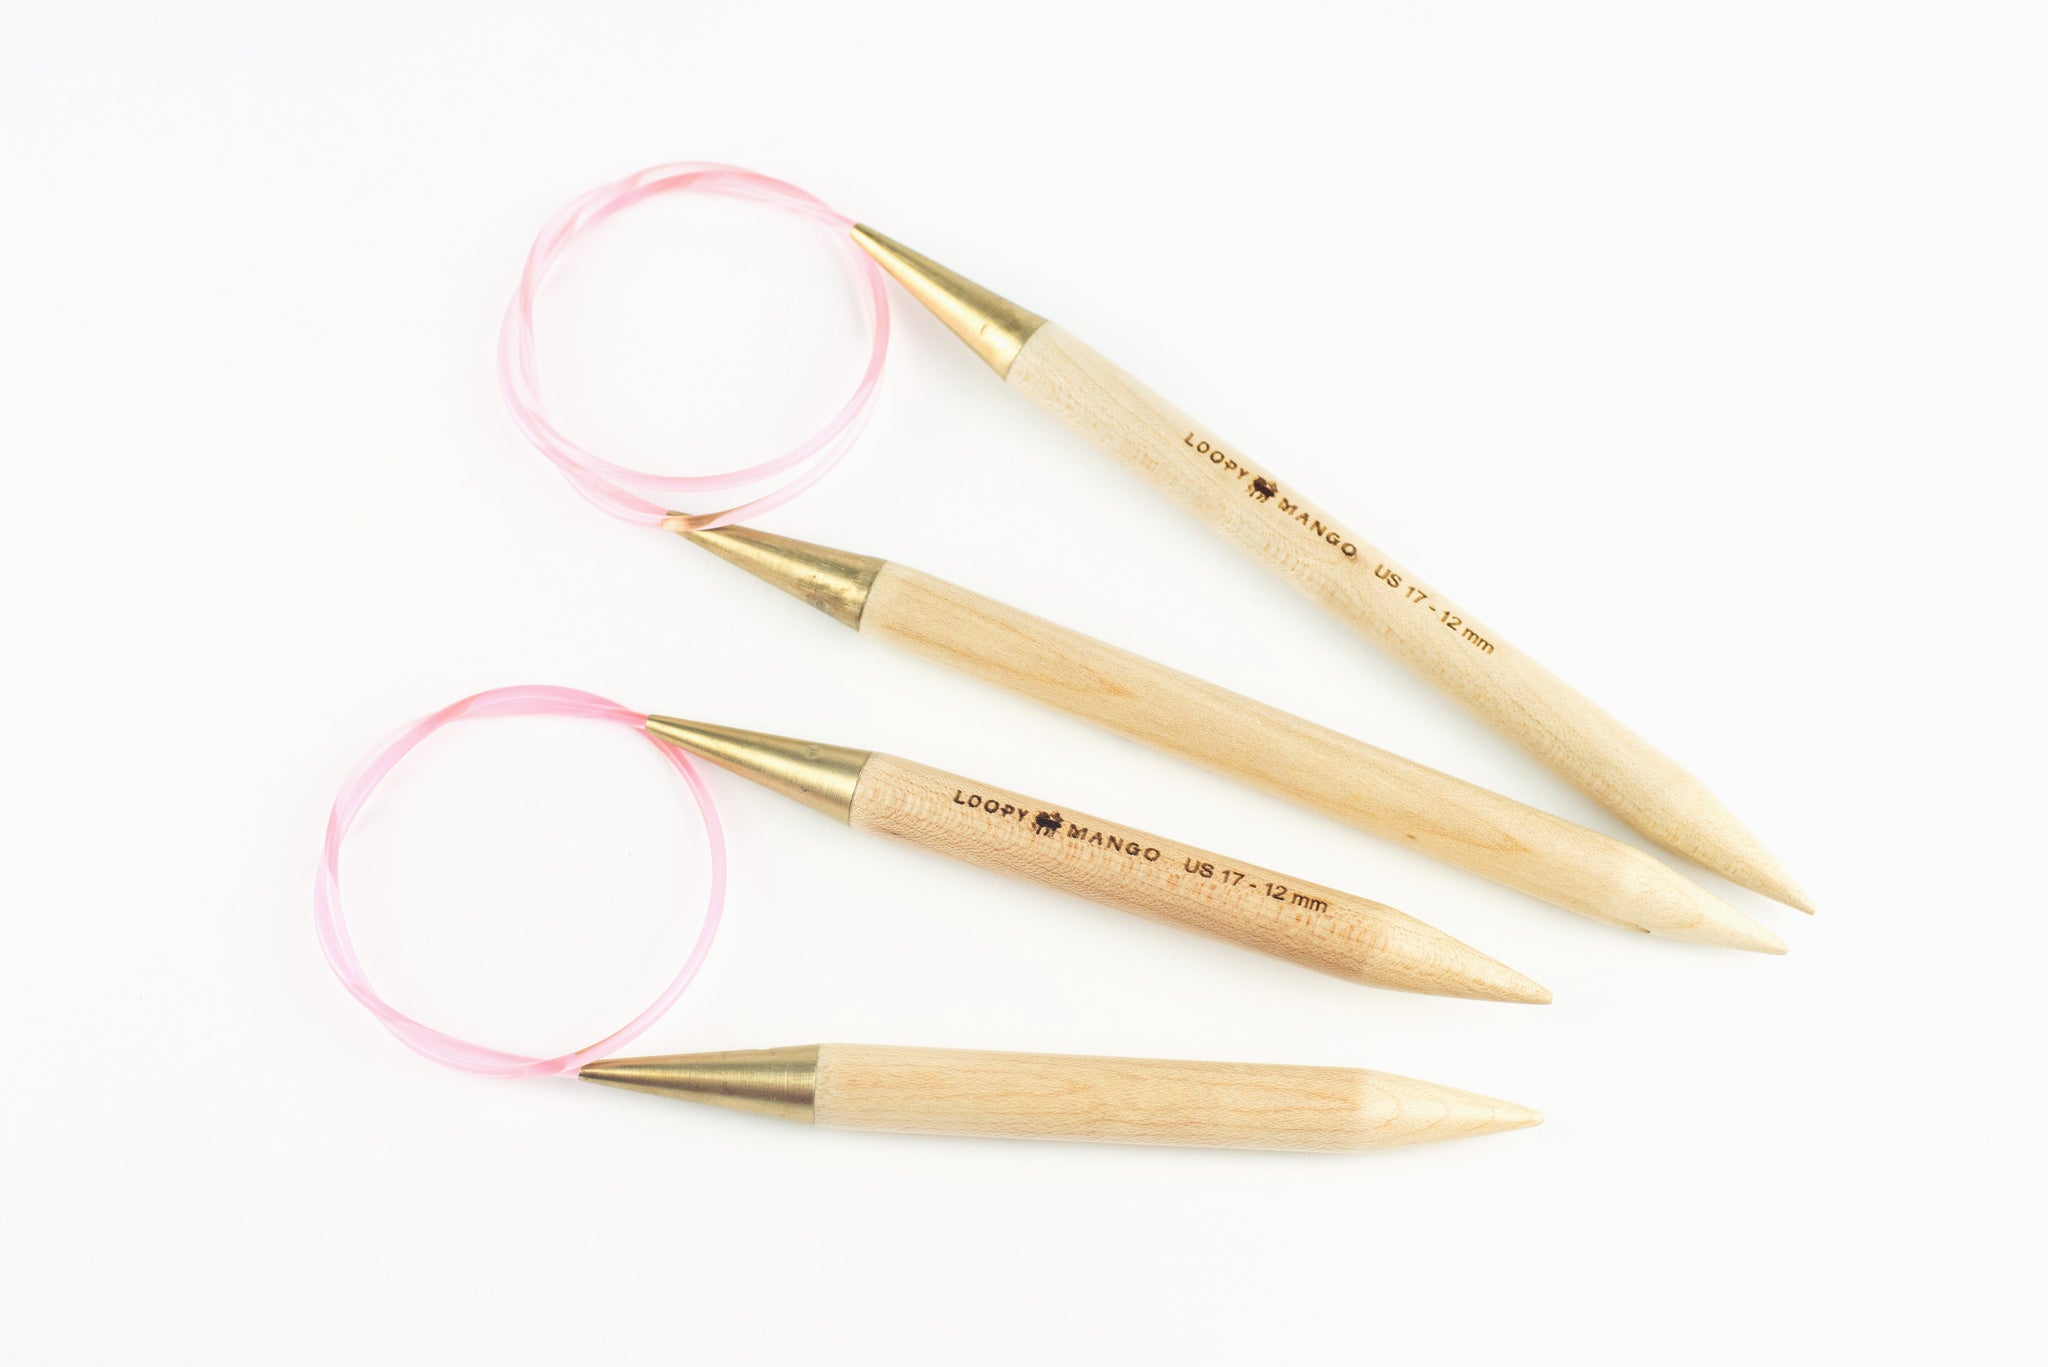 SALE PRICE!! - 50% OFF Loopy Mango Size US 13 (9 mm) Circular Knitting  Needles 32 (80 cm) in length.